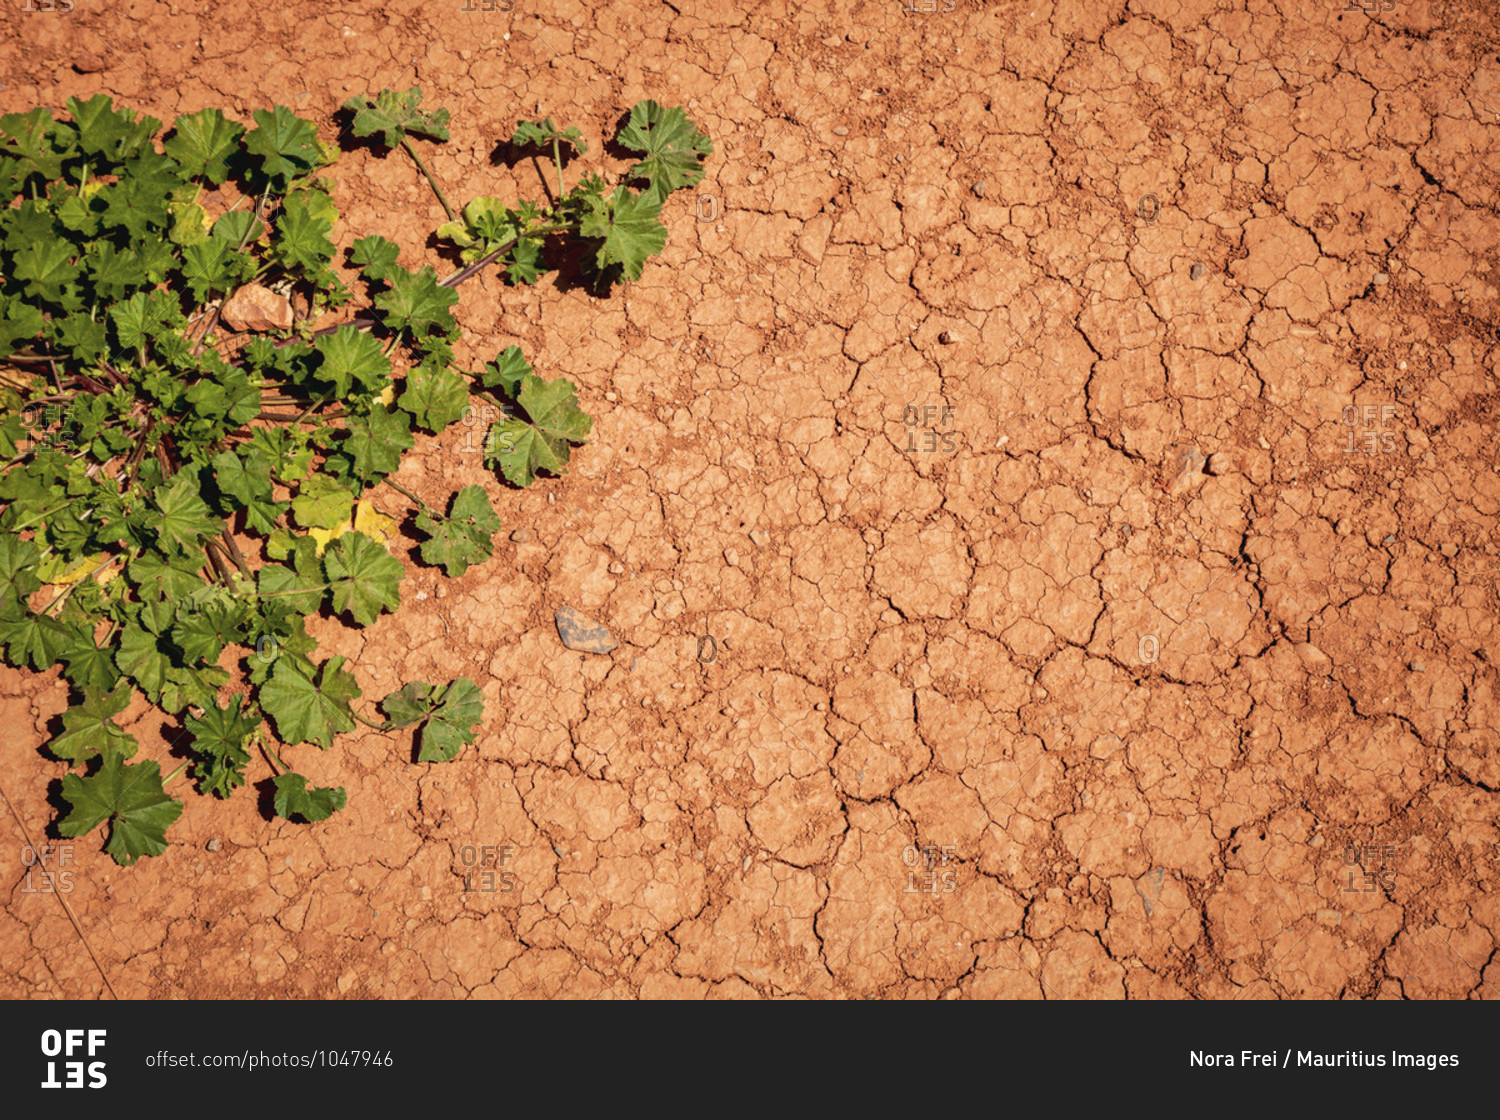 Drought, climate change, plants, nature conservation,\
sustainability stock photo - OFFSET